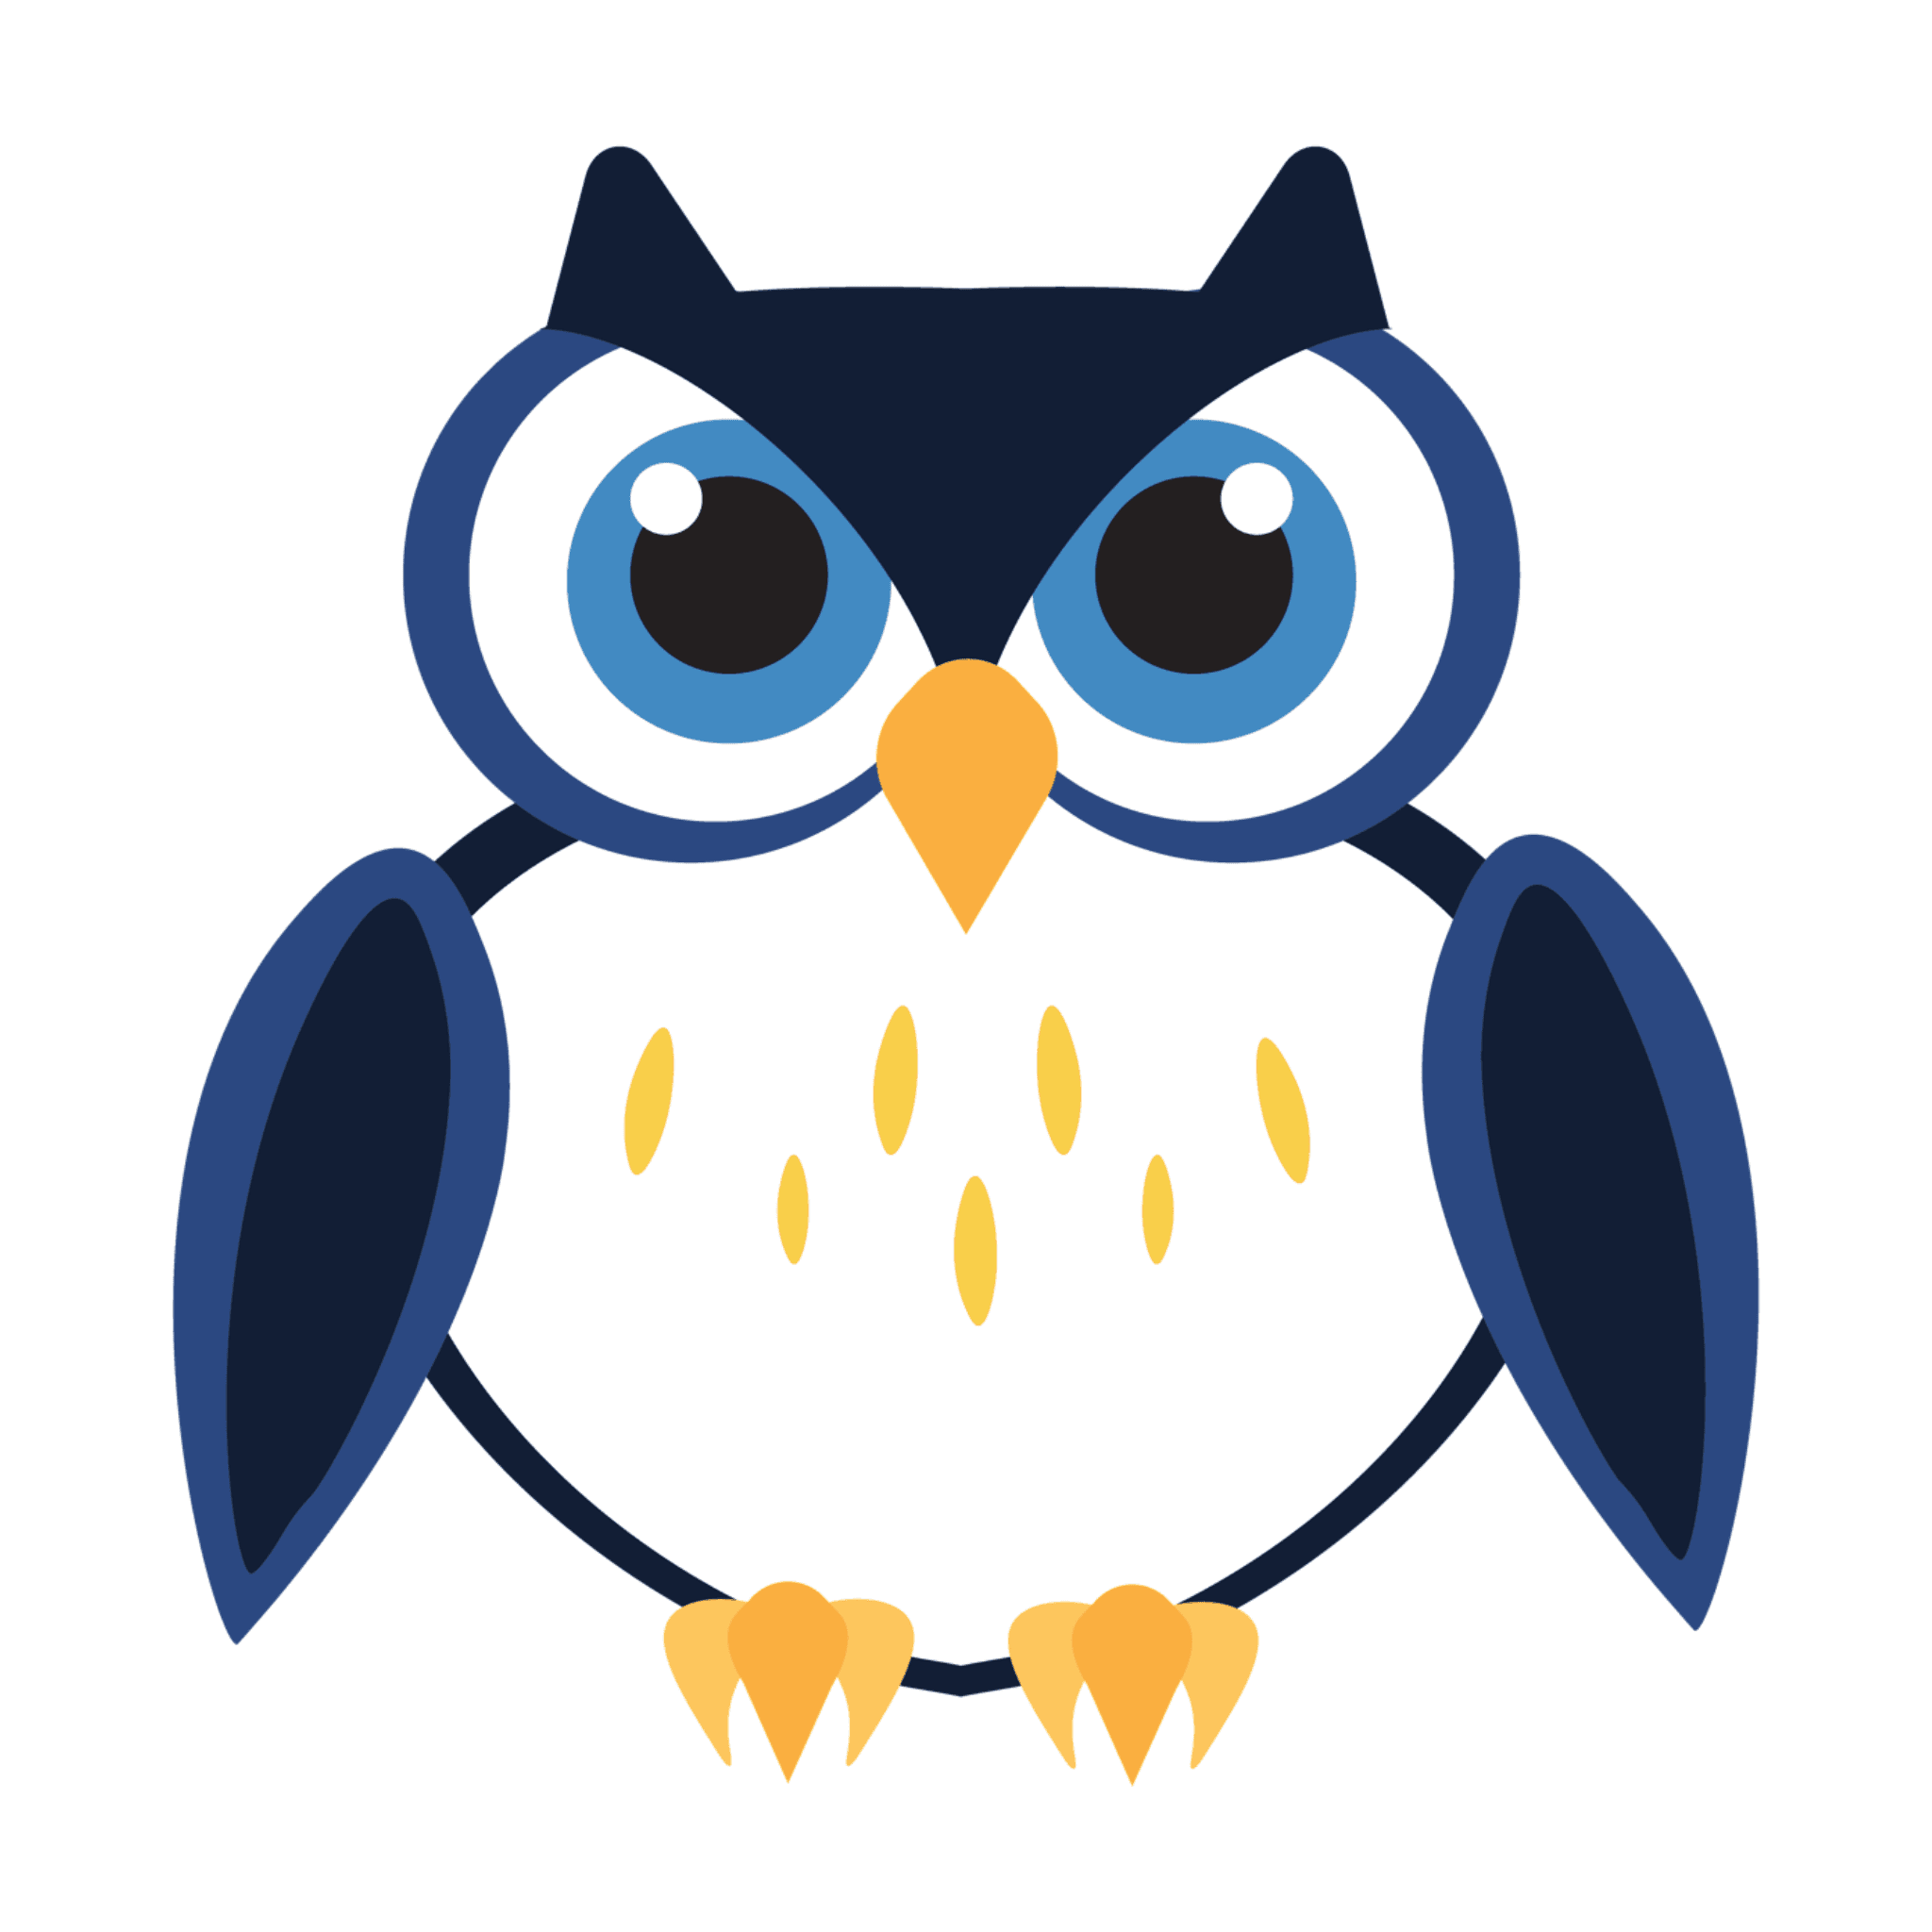 Ether Owl No. 4 - The Blue One